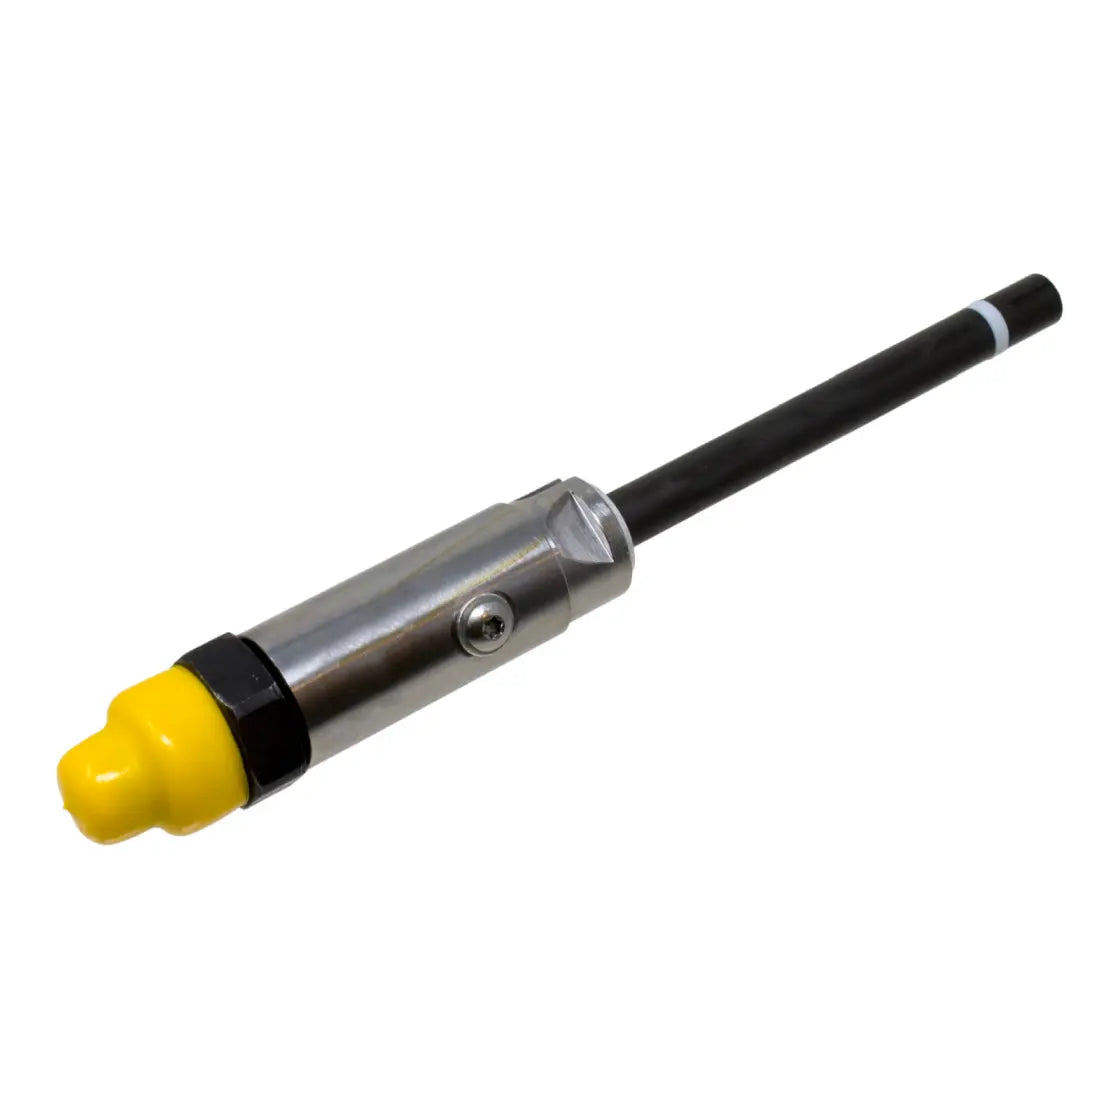 Duraforce 8N-7001, Fuel Injector Pencil Nozzle Assembly For Caterpillar